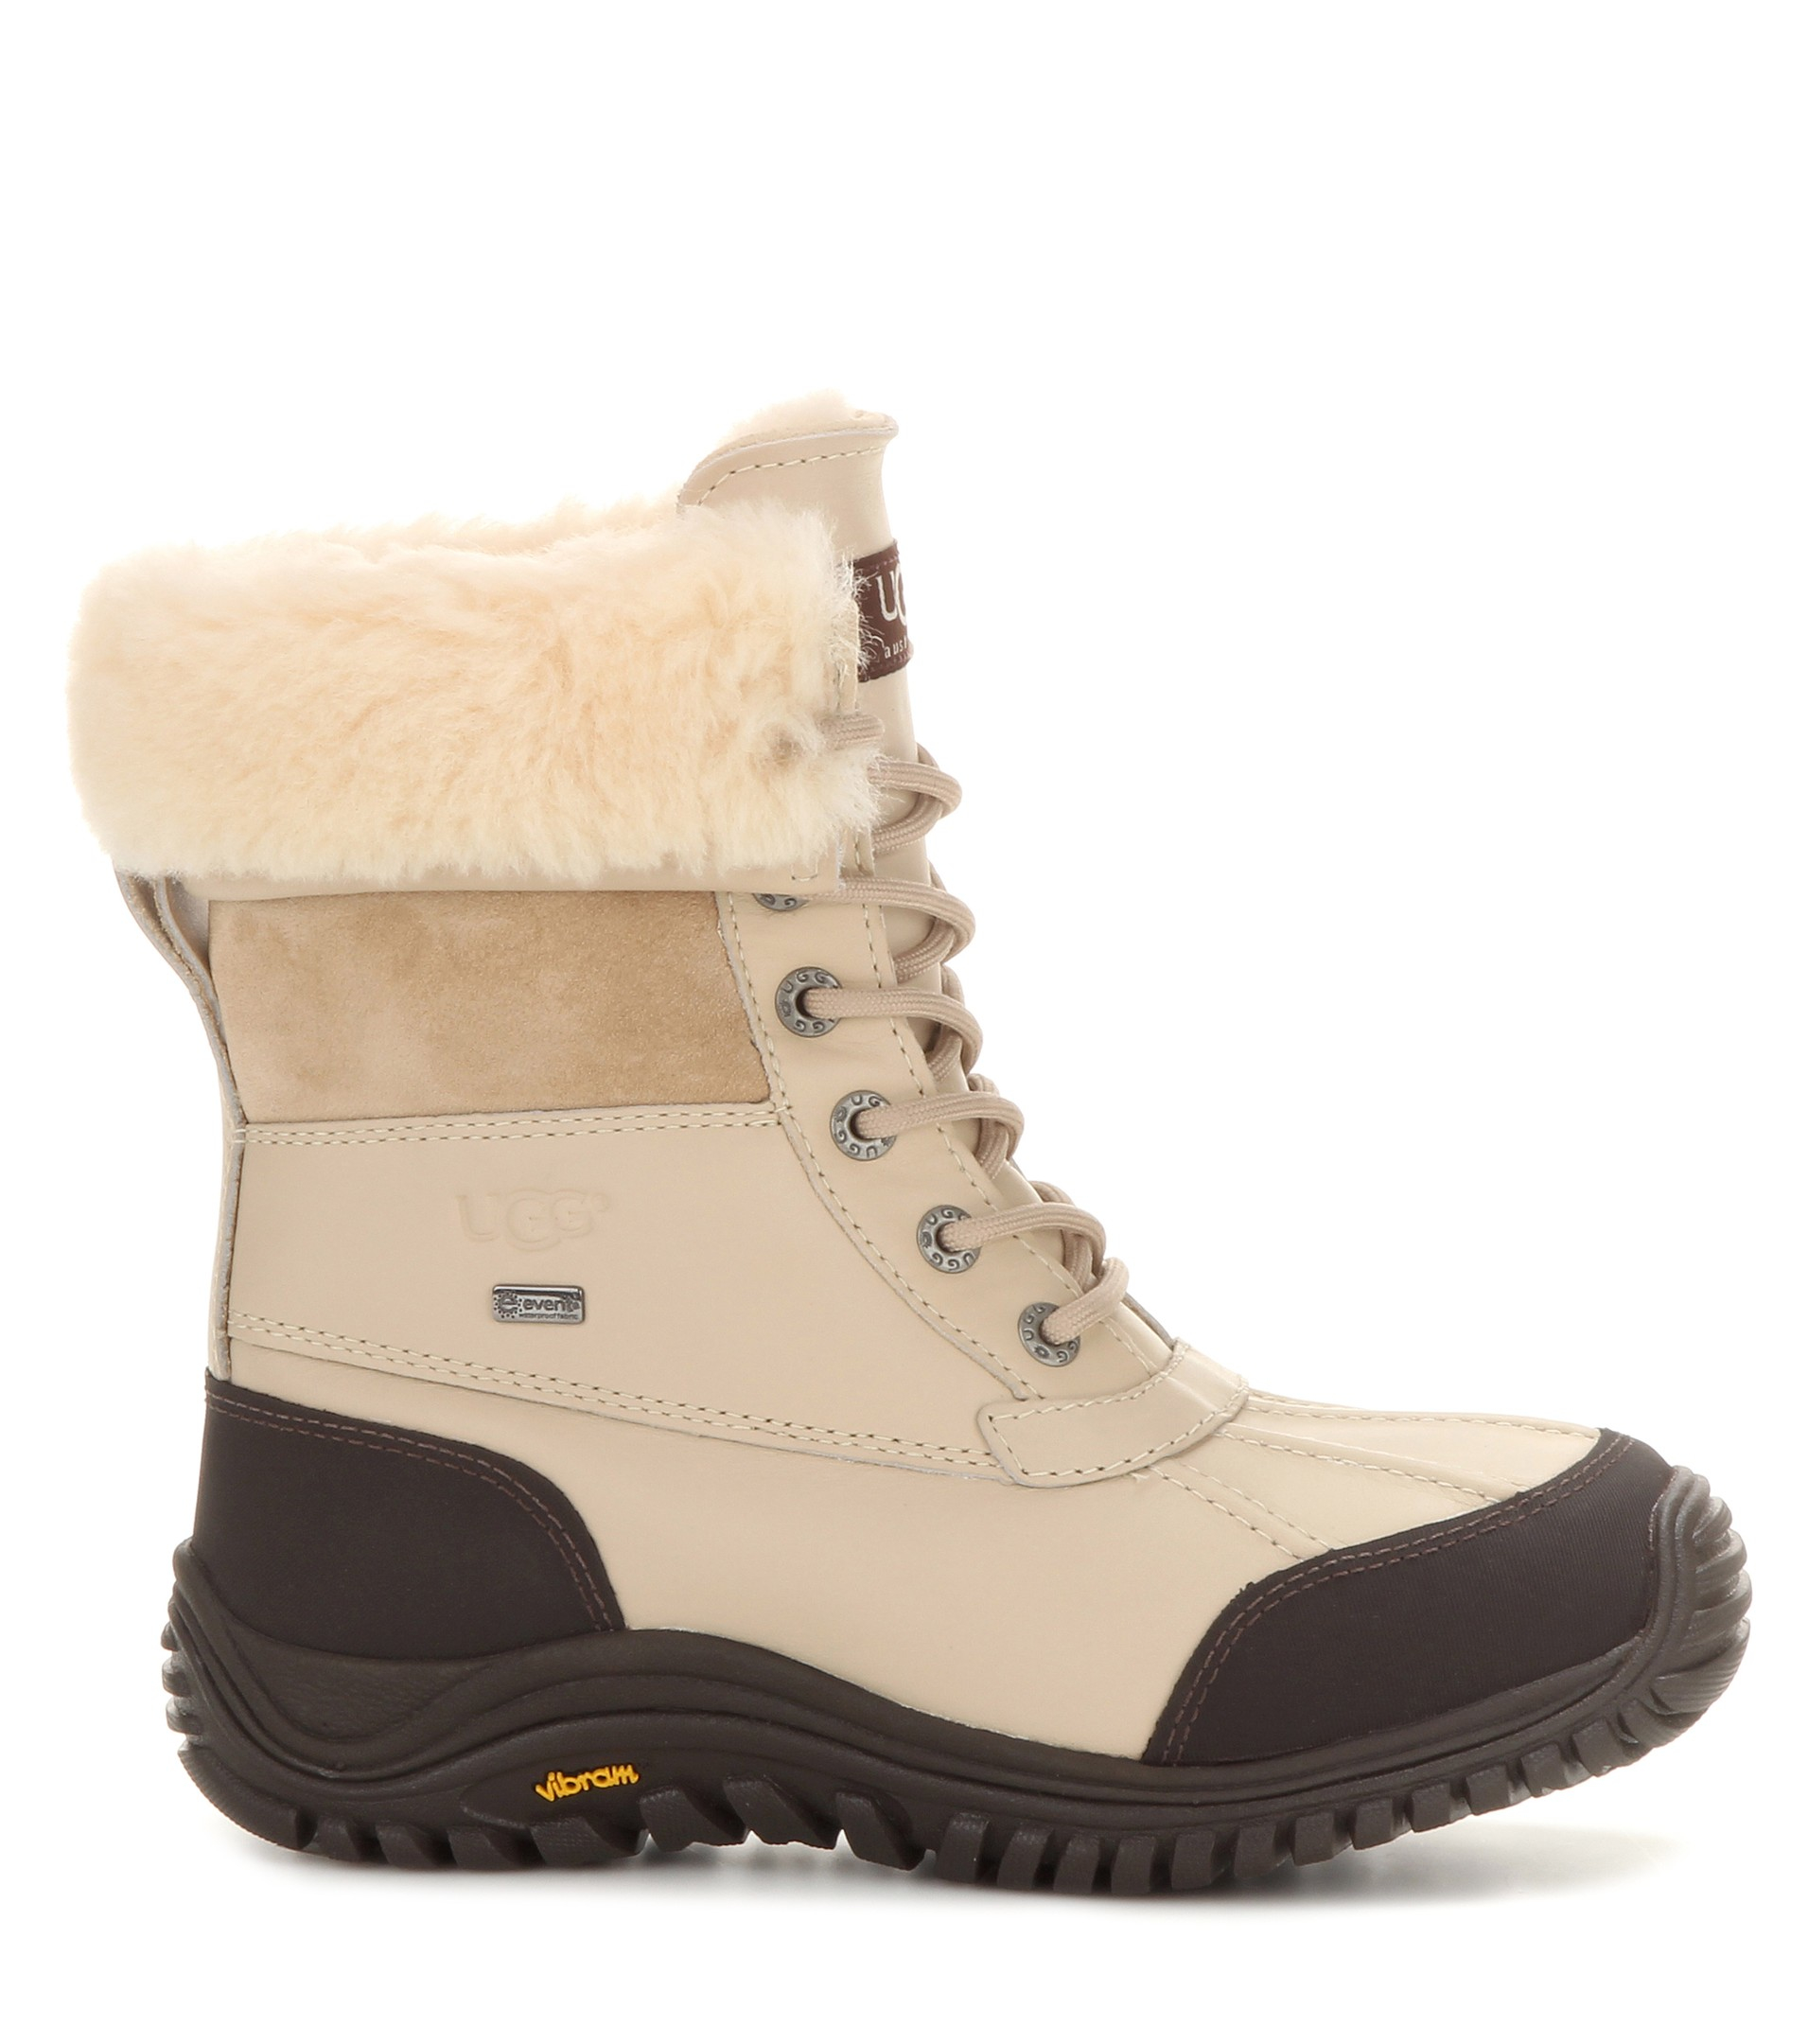 Lyst - Ugg Adirondack Ii Shearling-lined Leather Boots in Natural